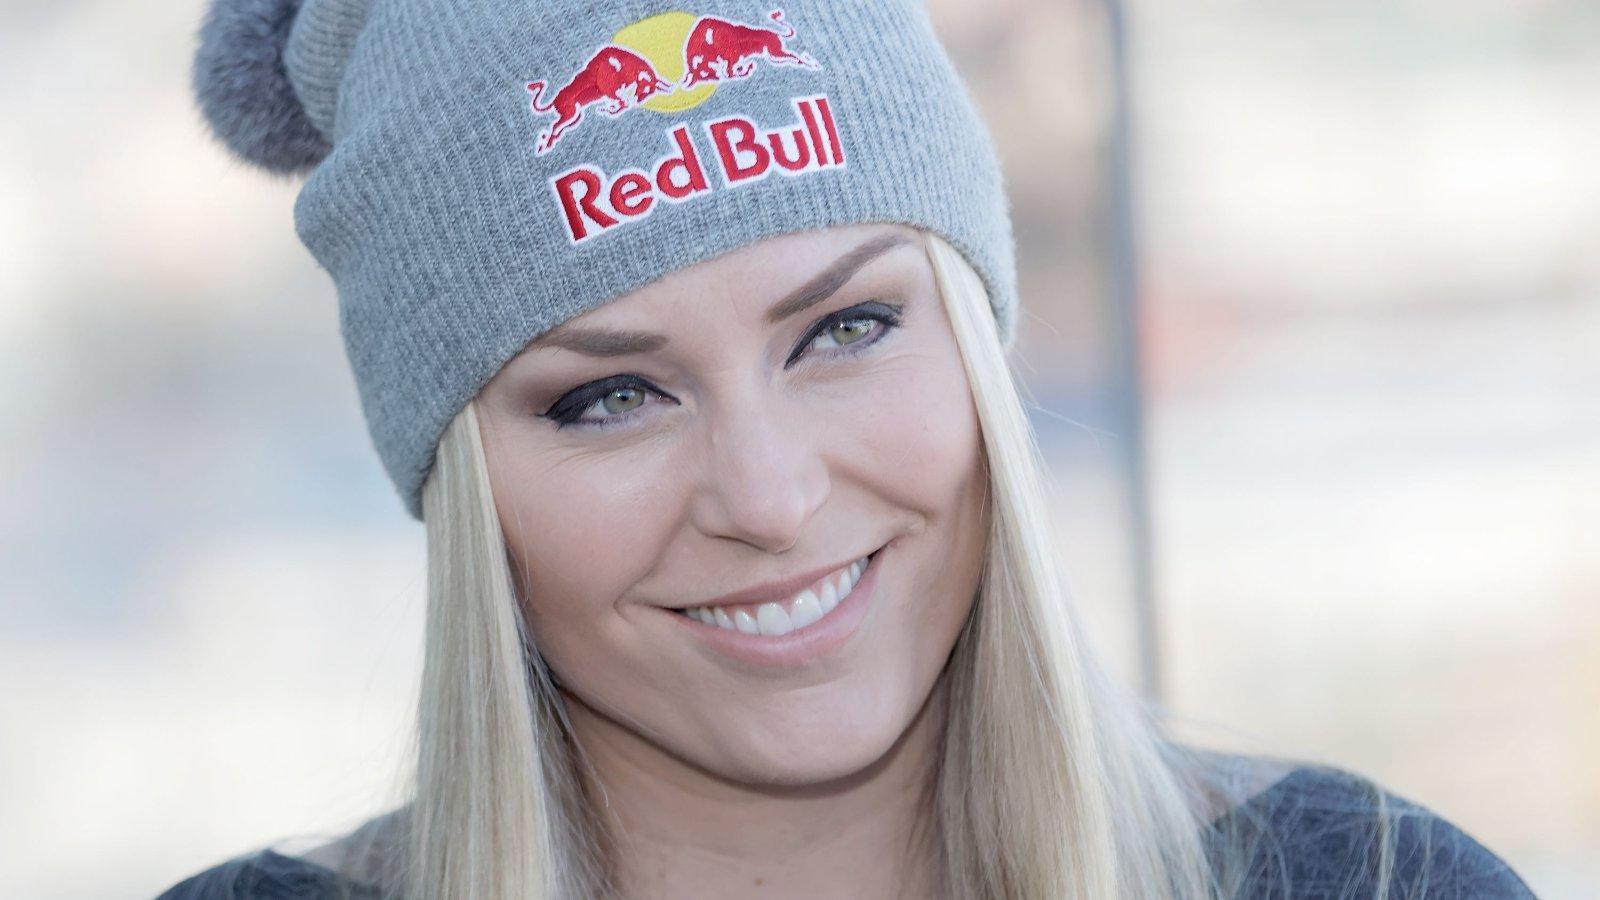 Lindsey Vonn wearing a grey Red Bull beanie and black shirt.